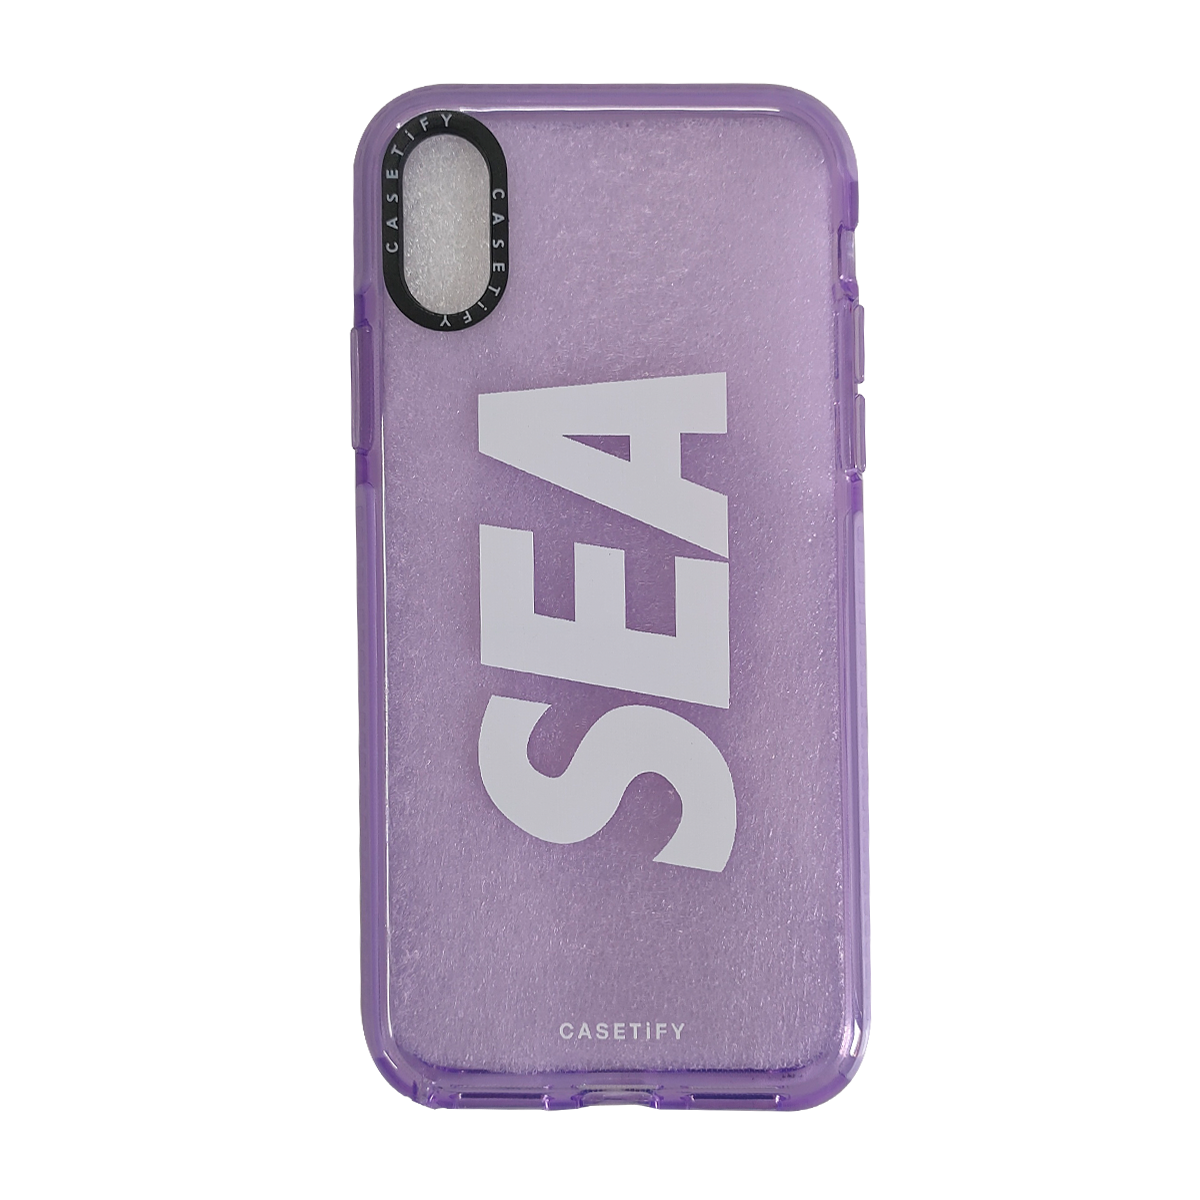 Casetify Sea Cases for iPhone XS MAX (Purple)